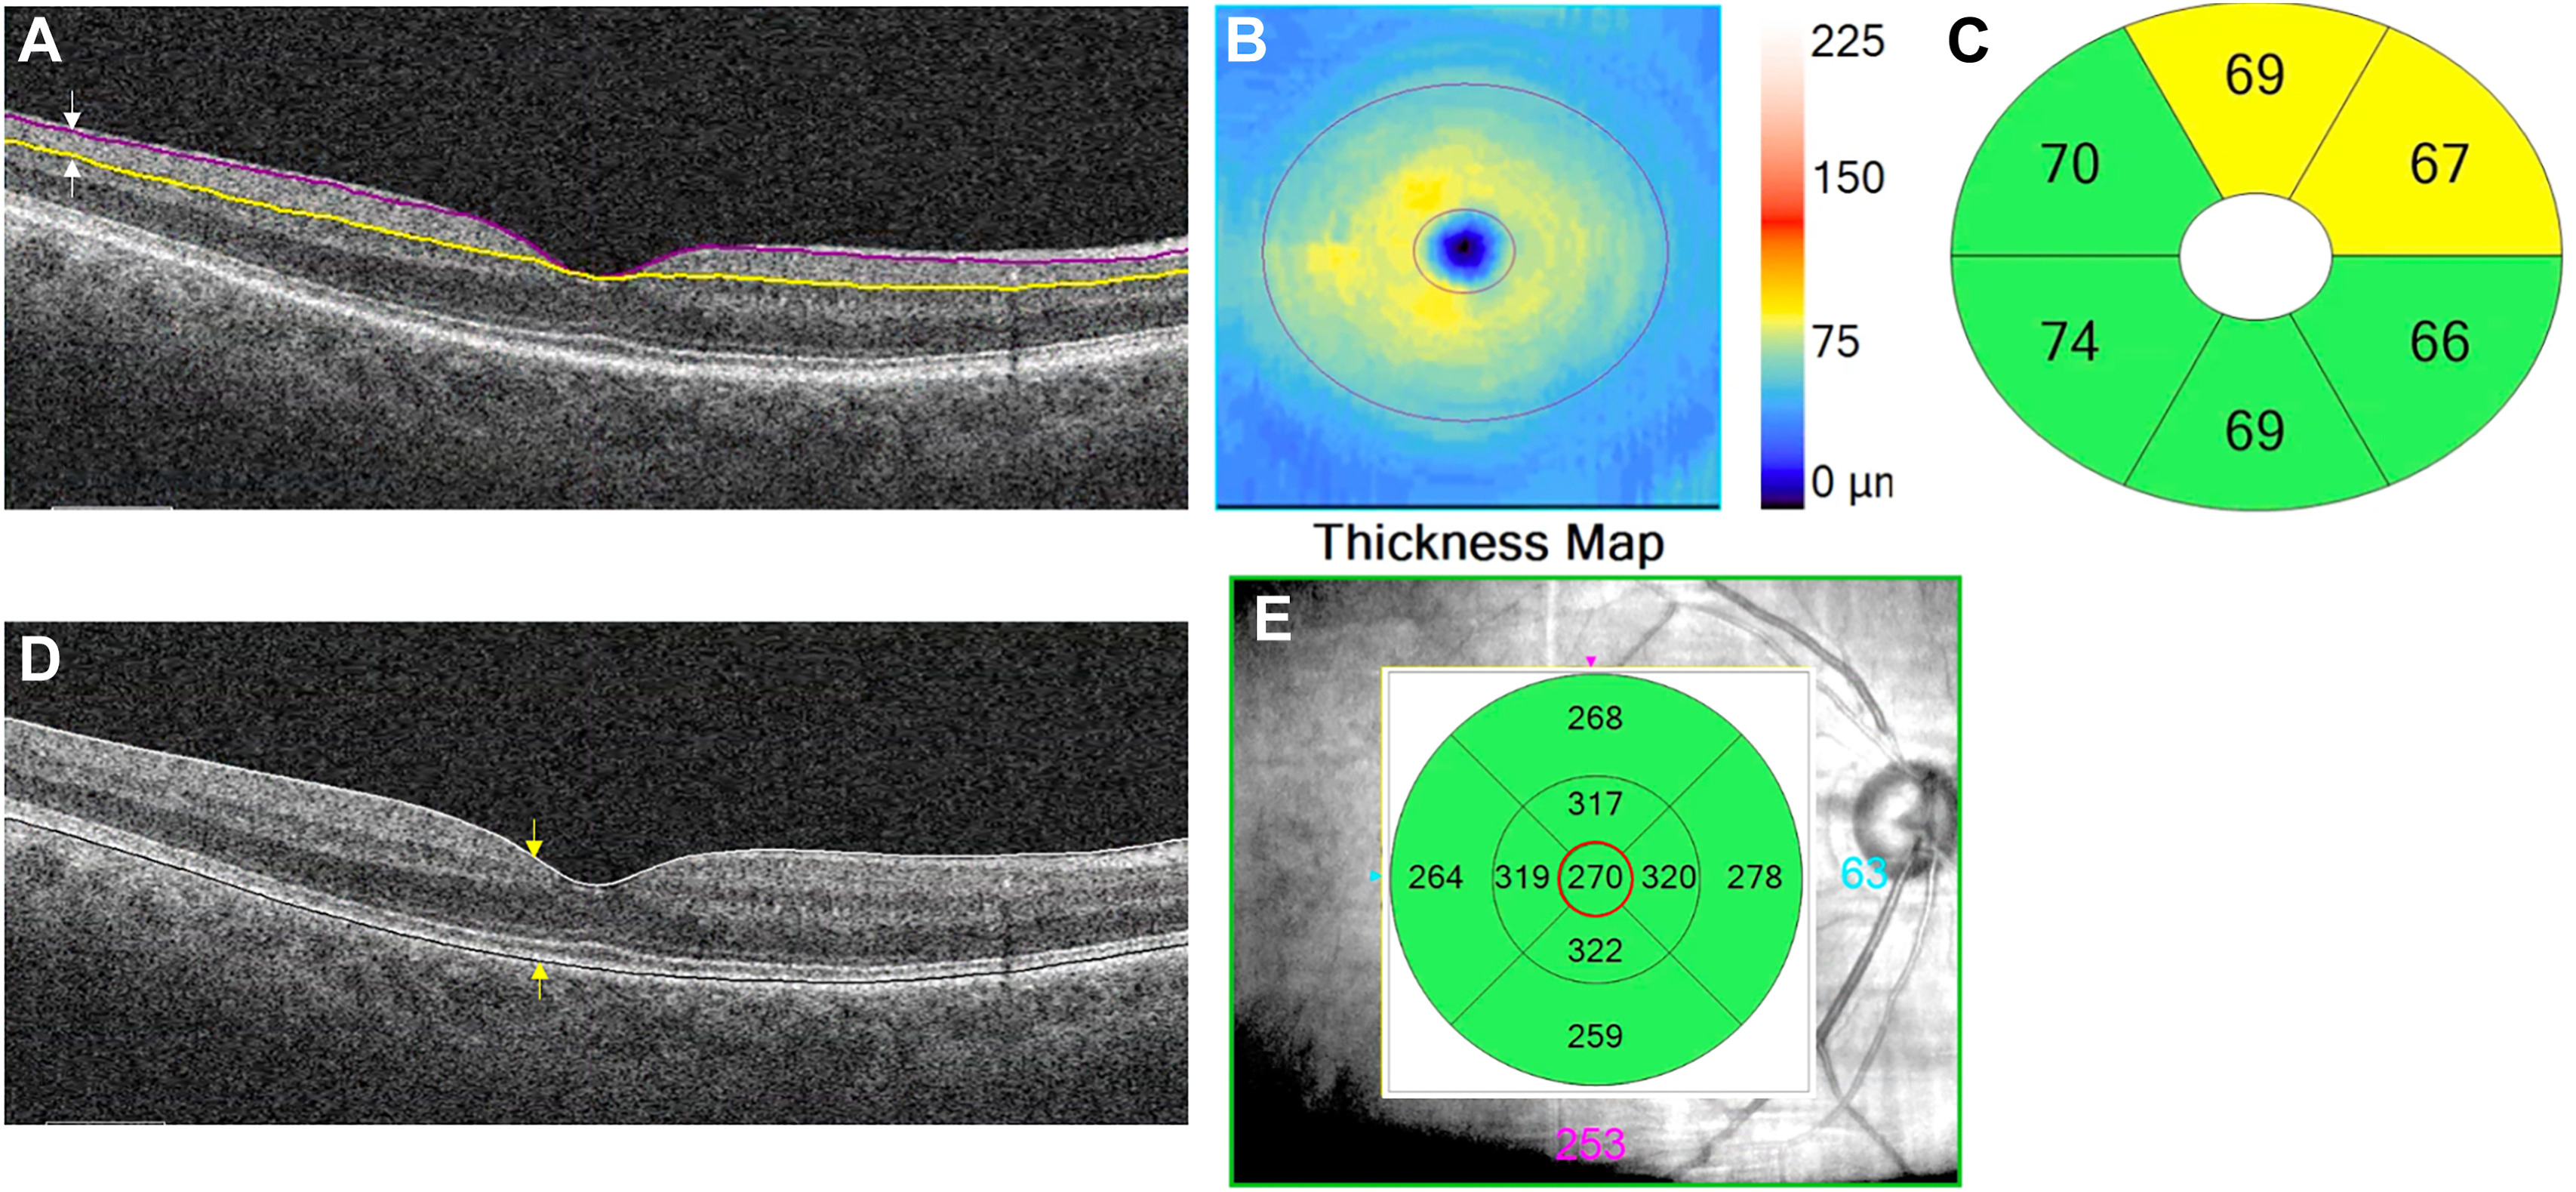 At time of PD diagnosis, generally 50% of dopaminergic input from the substantia nigra to the striatum is lost, which might reflect the dopaminergic state of the retina. This study found small but notable differences in IPL thickness among Parkinson’s patients. (Image from a different study of retinal changes in PD.)